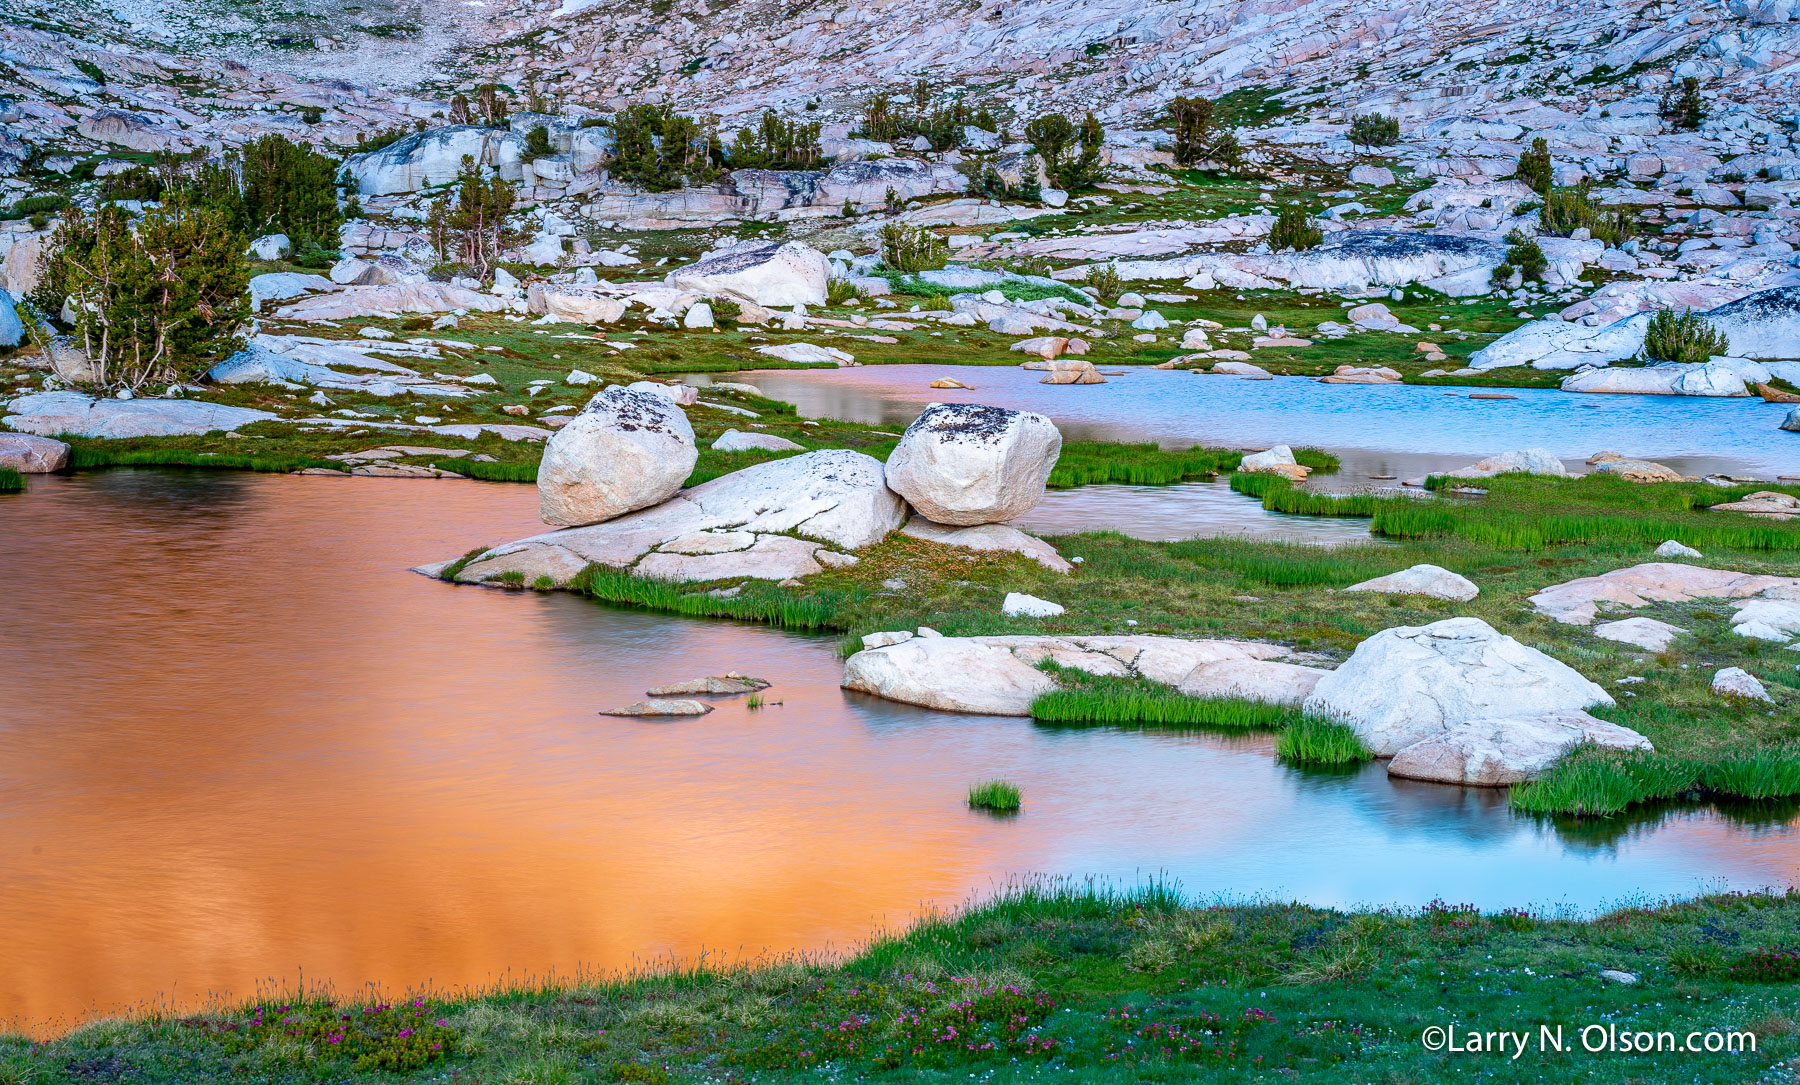 Finger Lakes, Yosemite National Park, CA | The Sawtooth Ridge glows orange in the waters of Finger Lakes.